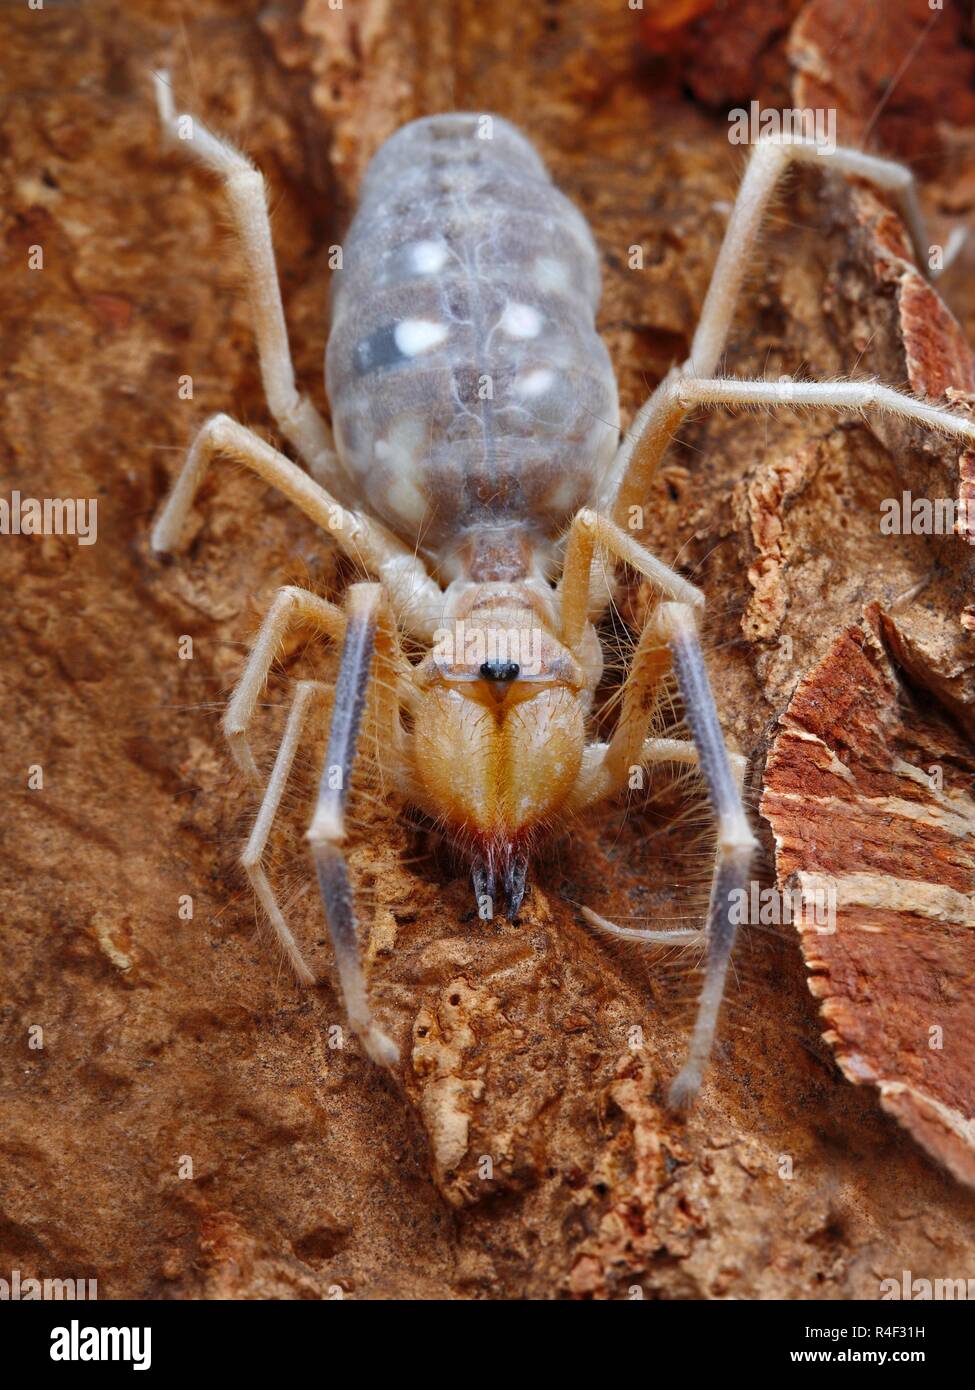 Close up photo of a Camel spider Stock Photo